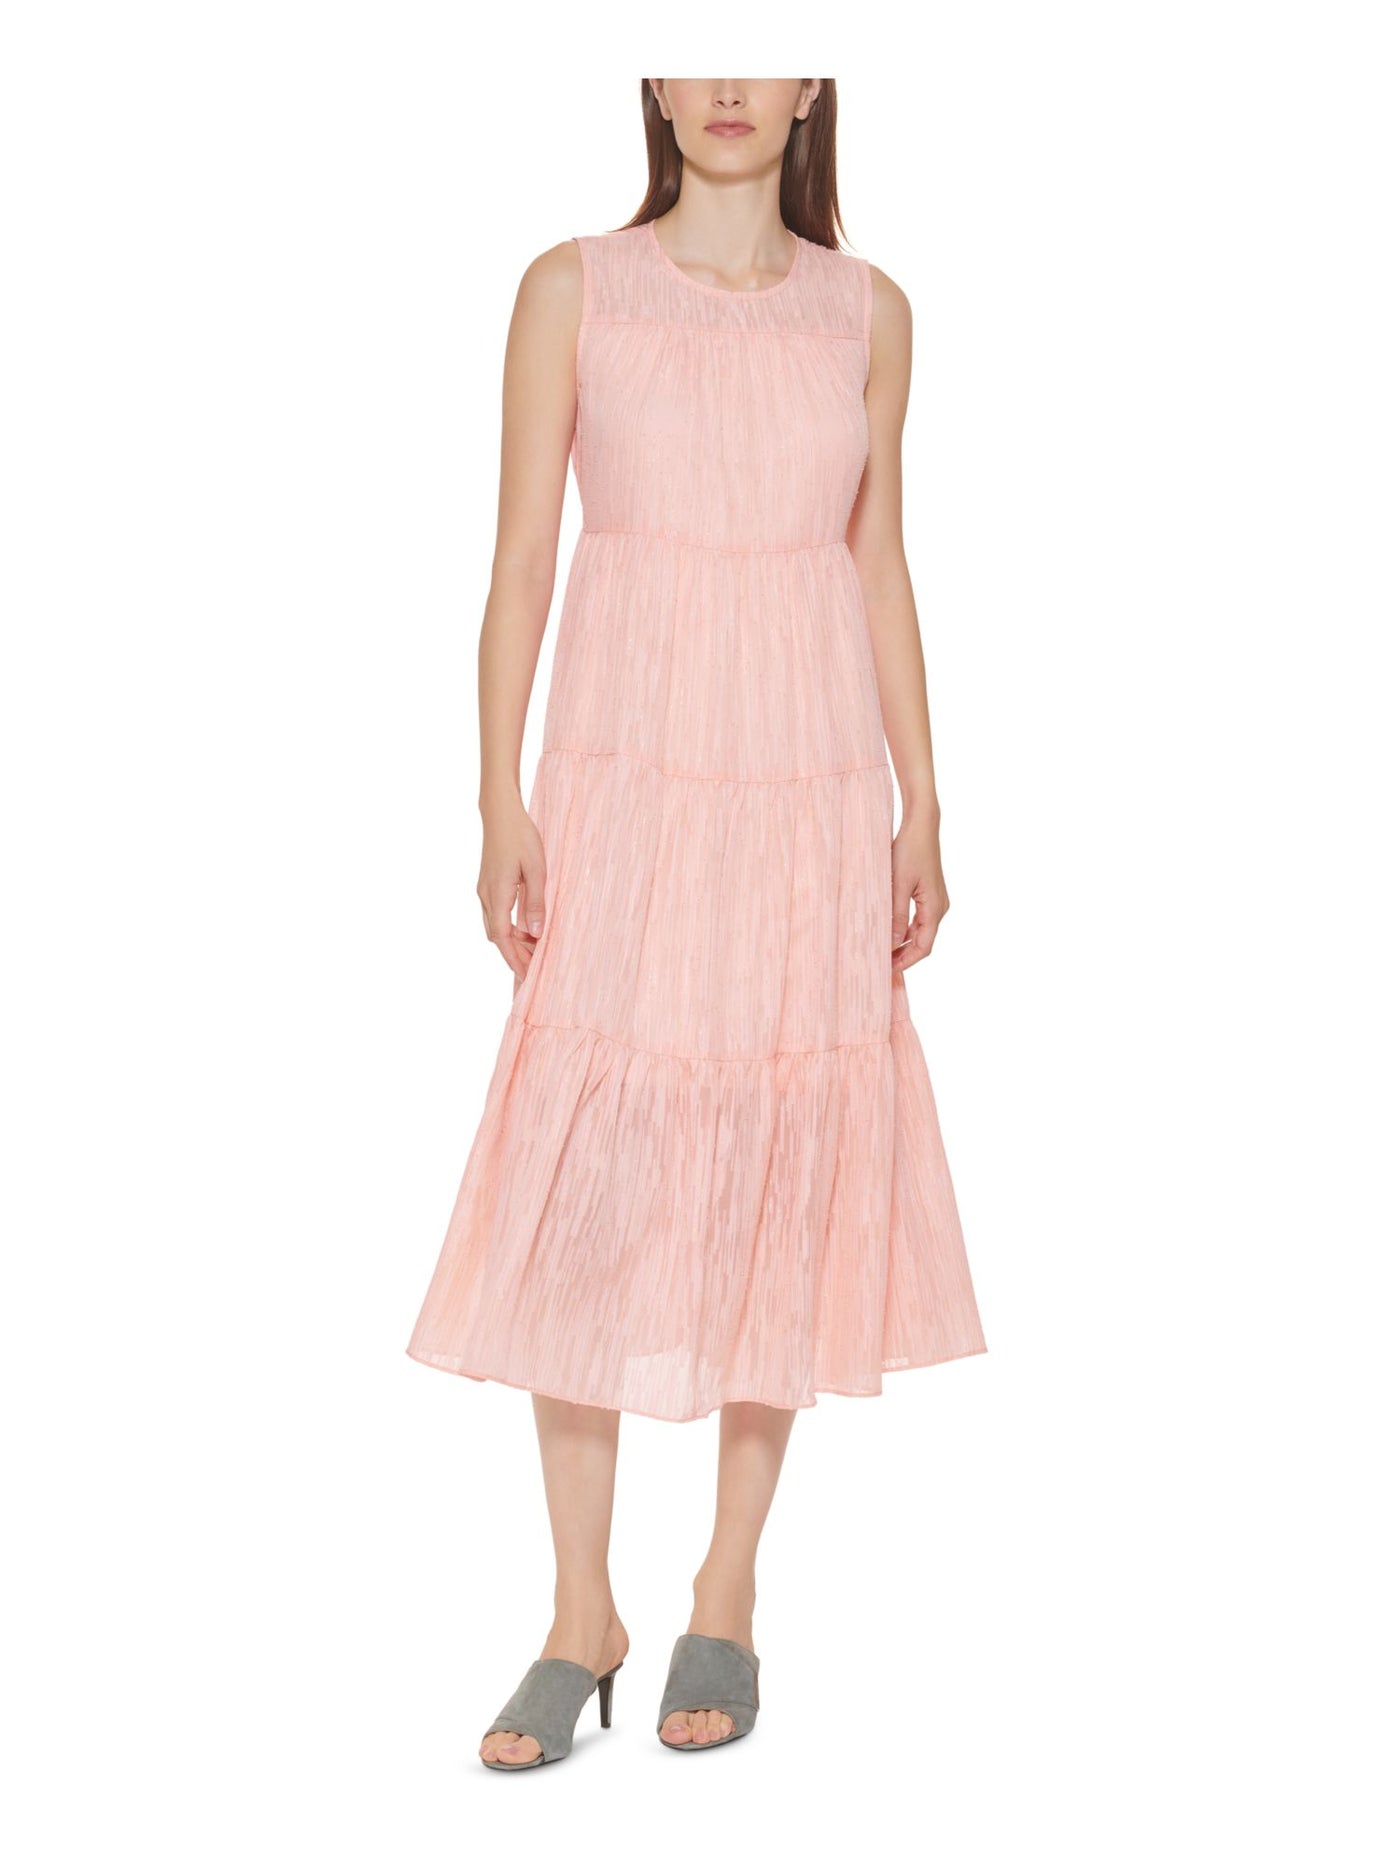 CALVIN KLEIN Womens Pink Sheer Tie Tiered Keyhole Closure Lined Pul Sleeveless Round Neck Tea-Length Shift Dress 12